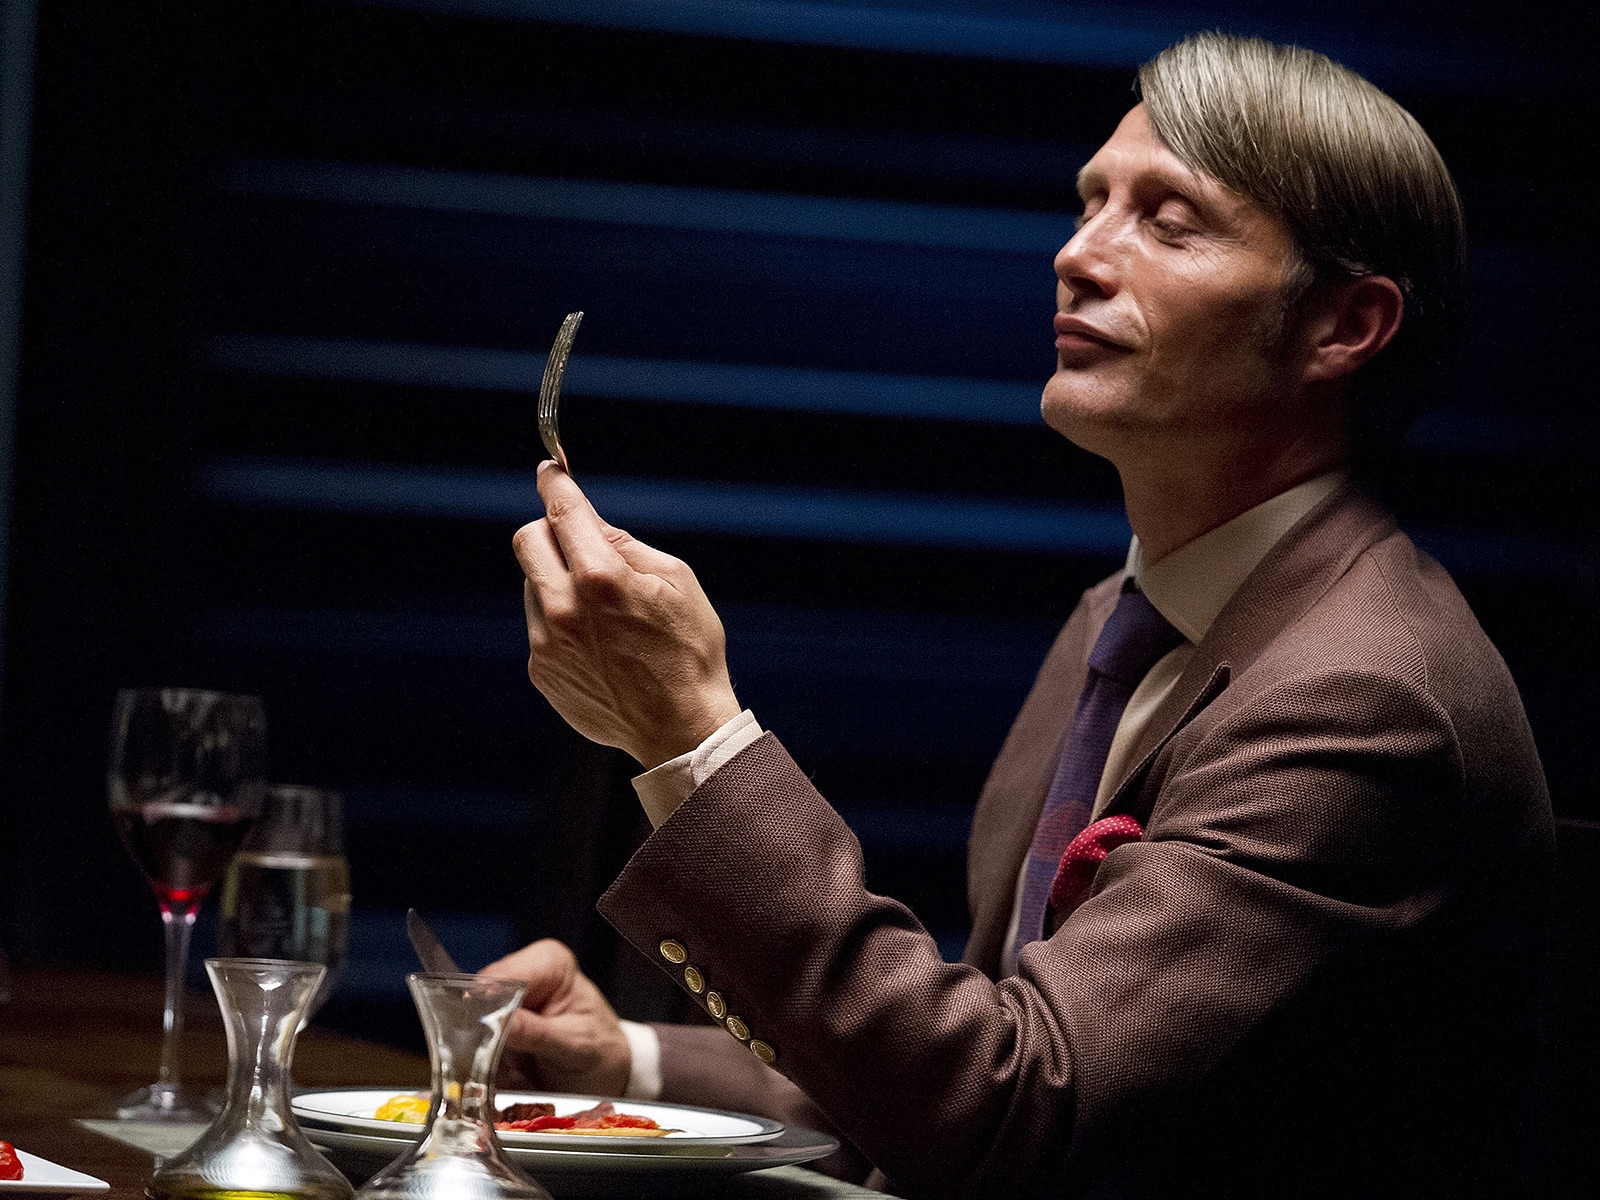 Hannibal 2013 for 1600 x 1200 resolution